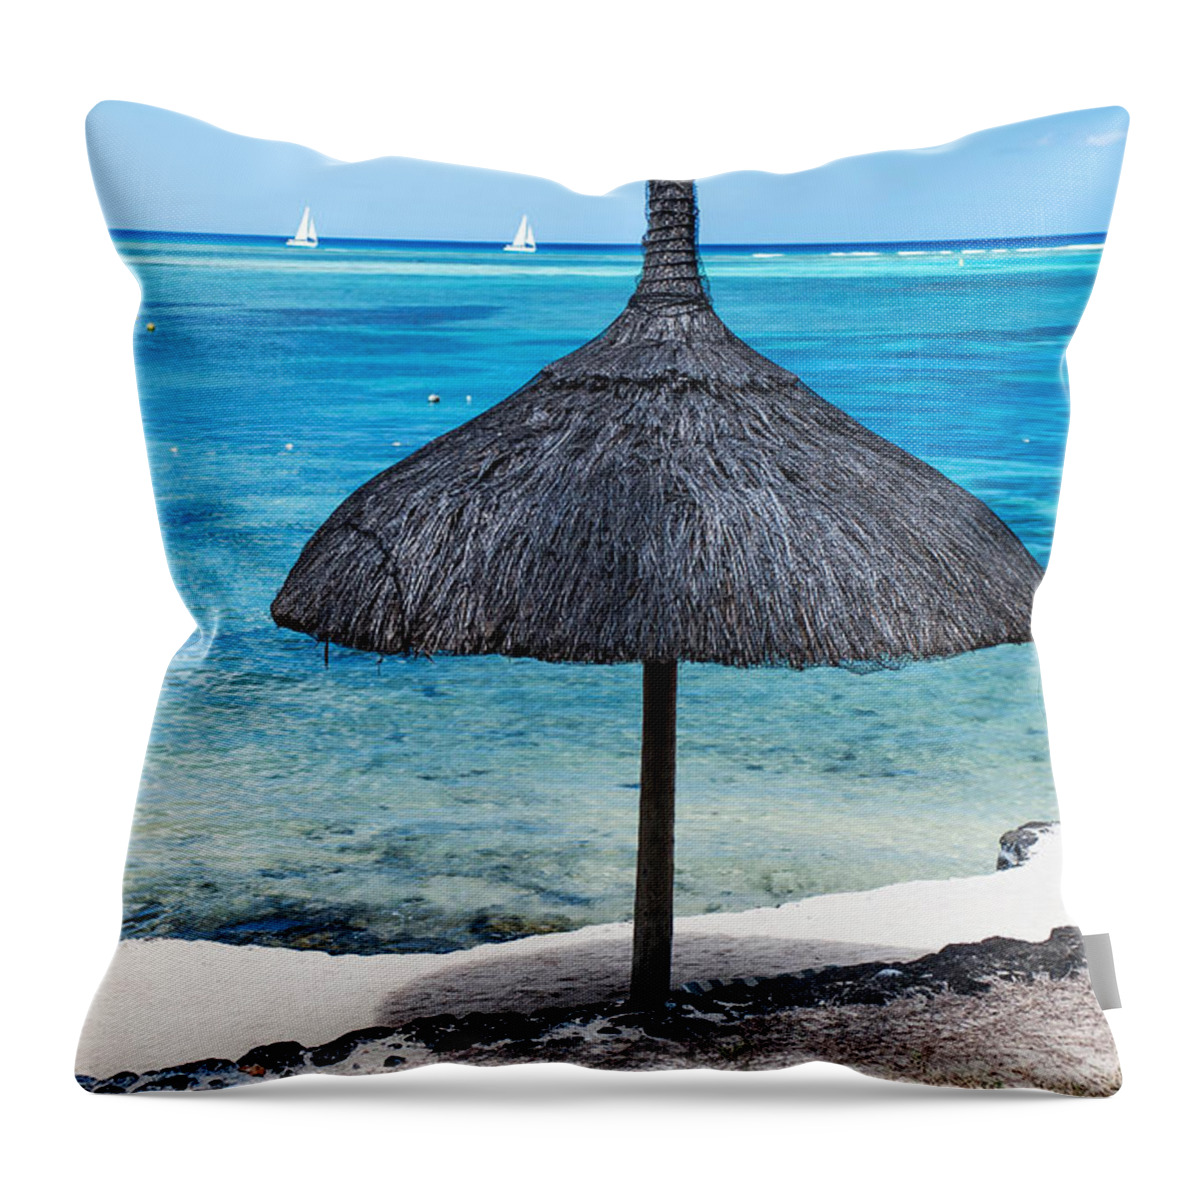 Tropic Throw Pillow featuring the photograph In Perfect Balance. Beach Life by Jenny Rainbow